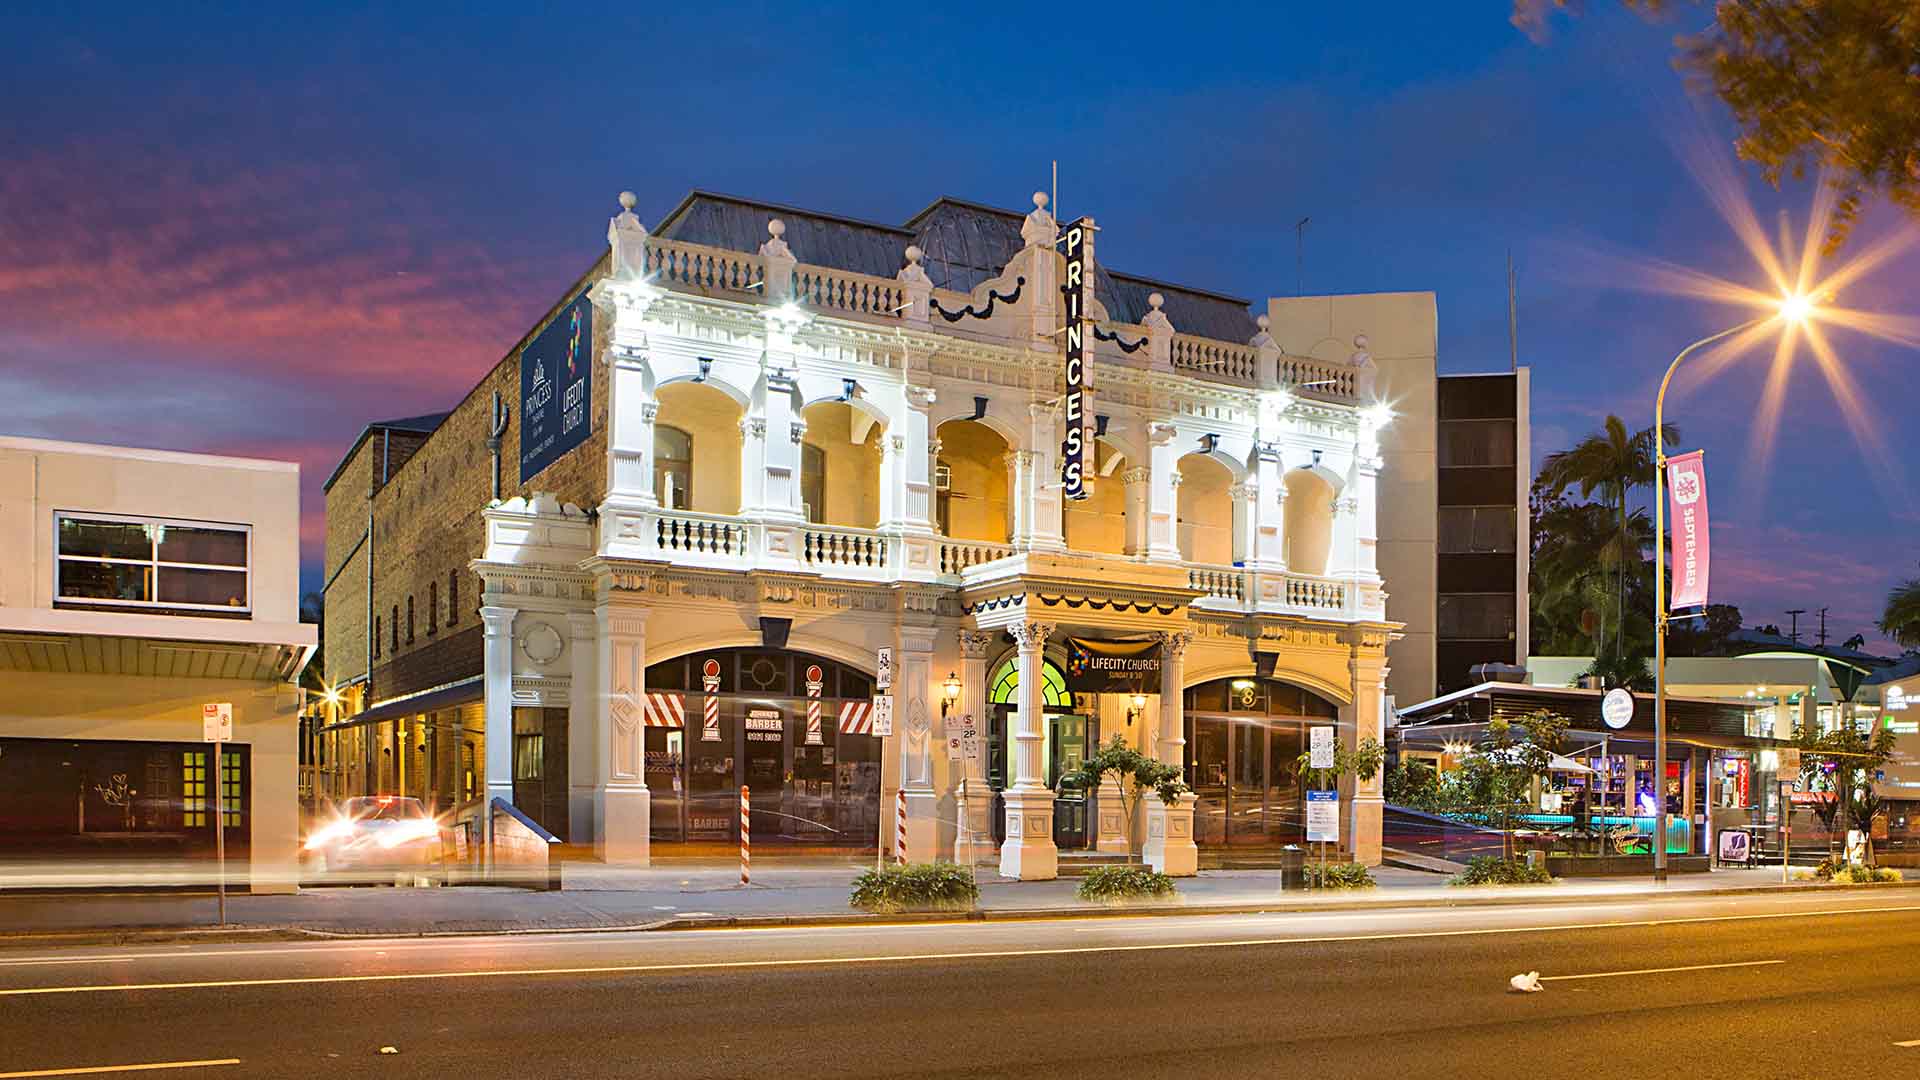 Woolloongabba's 133-Year-Old Princess Theatre Is Getting a Huge Revamp From The Tivoli Crew